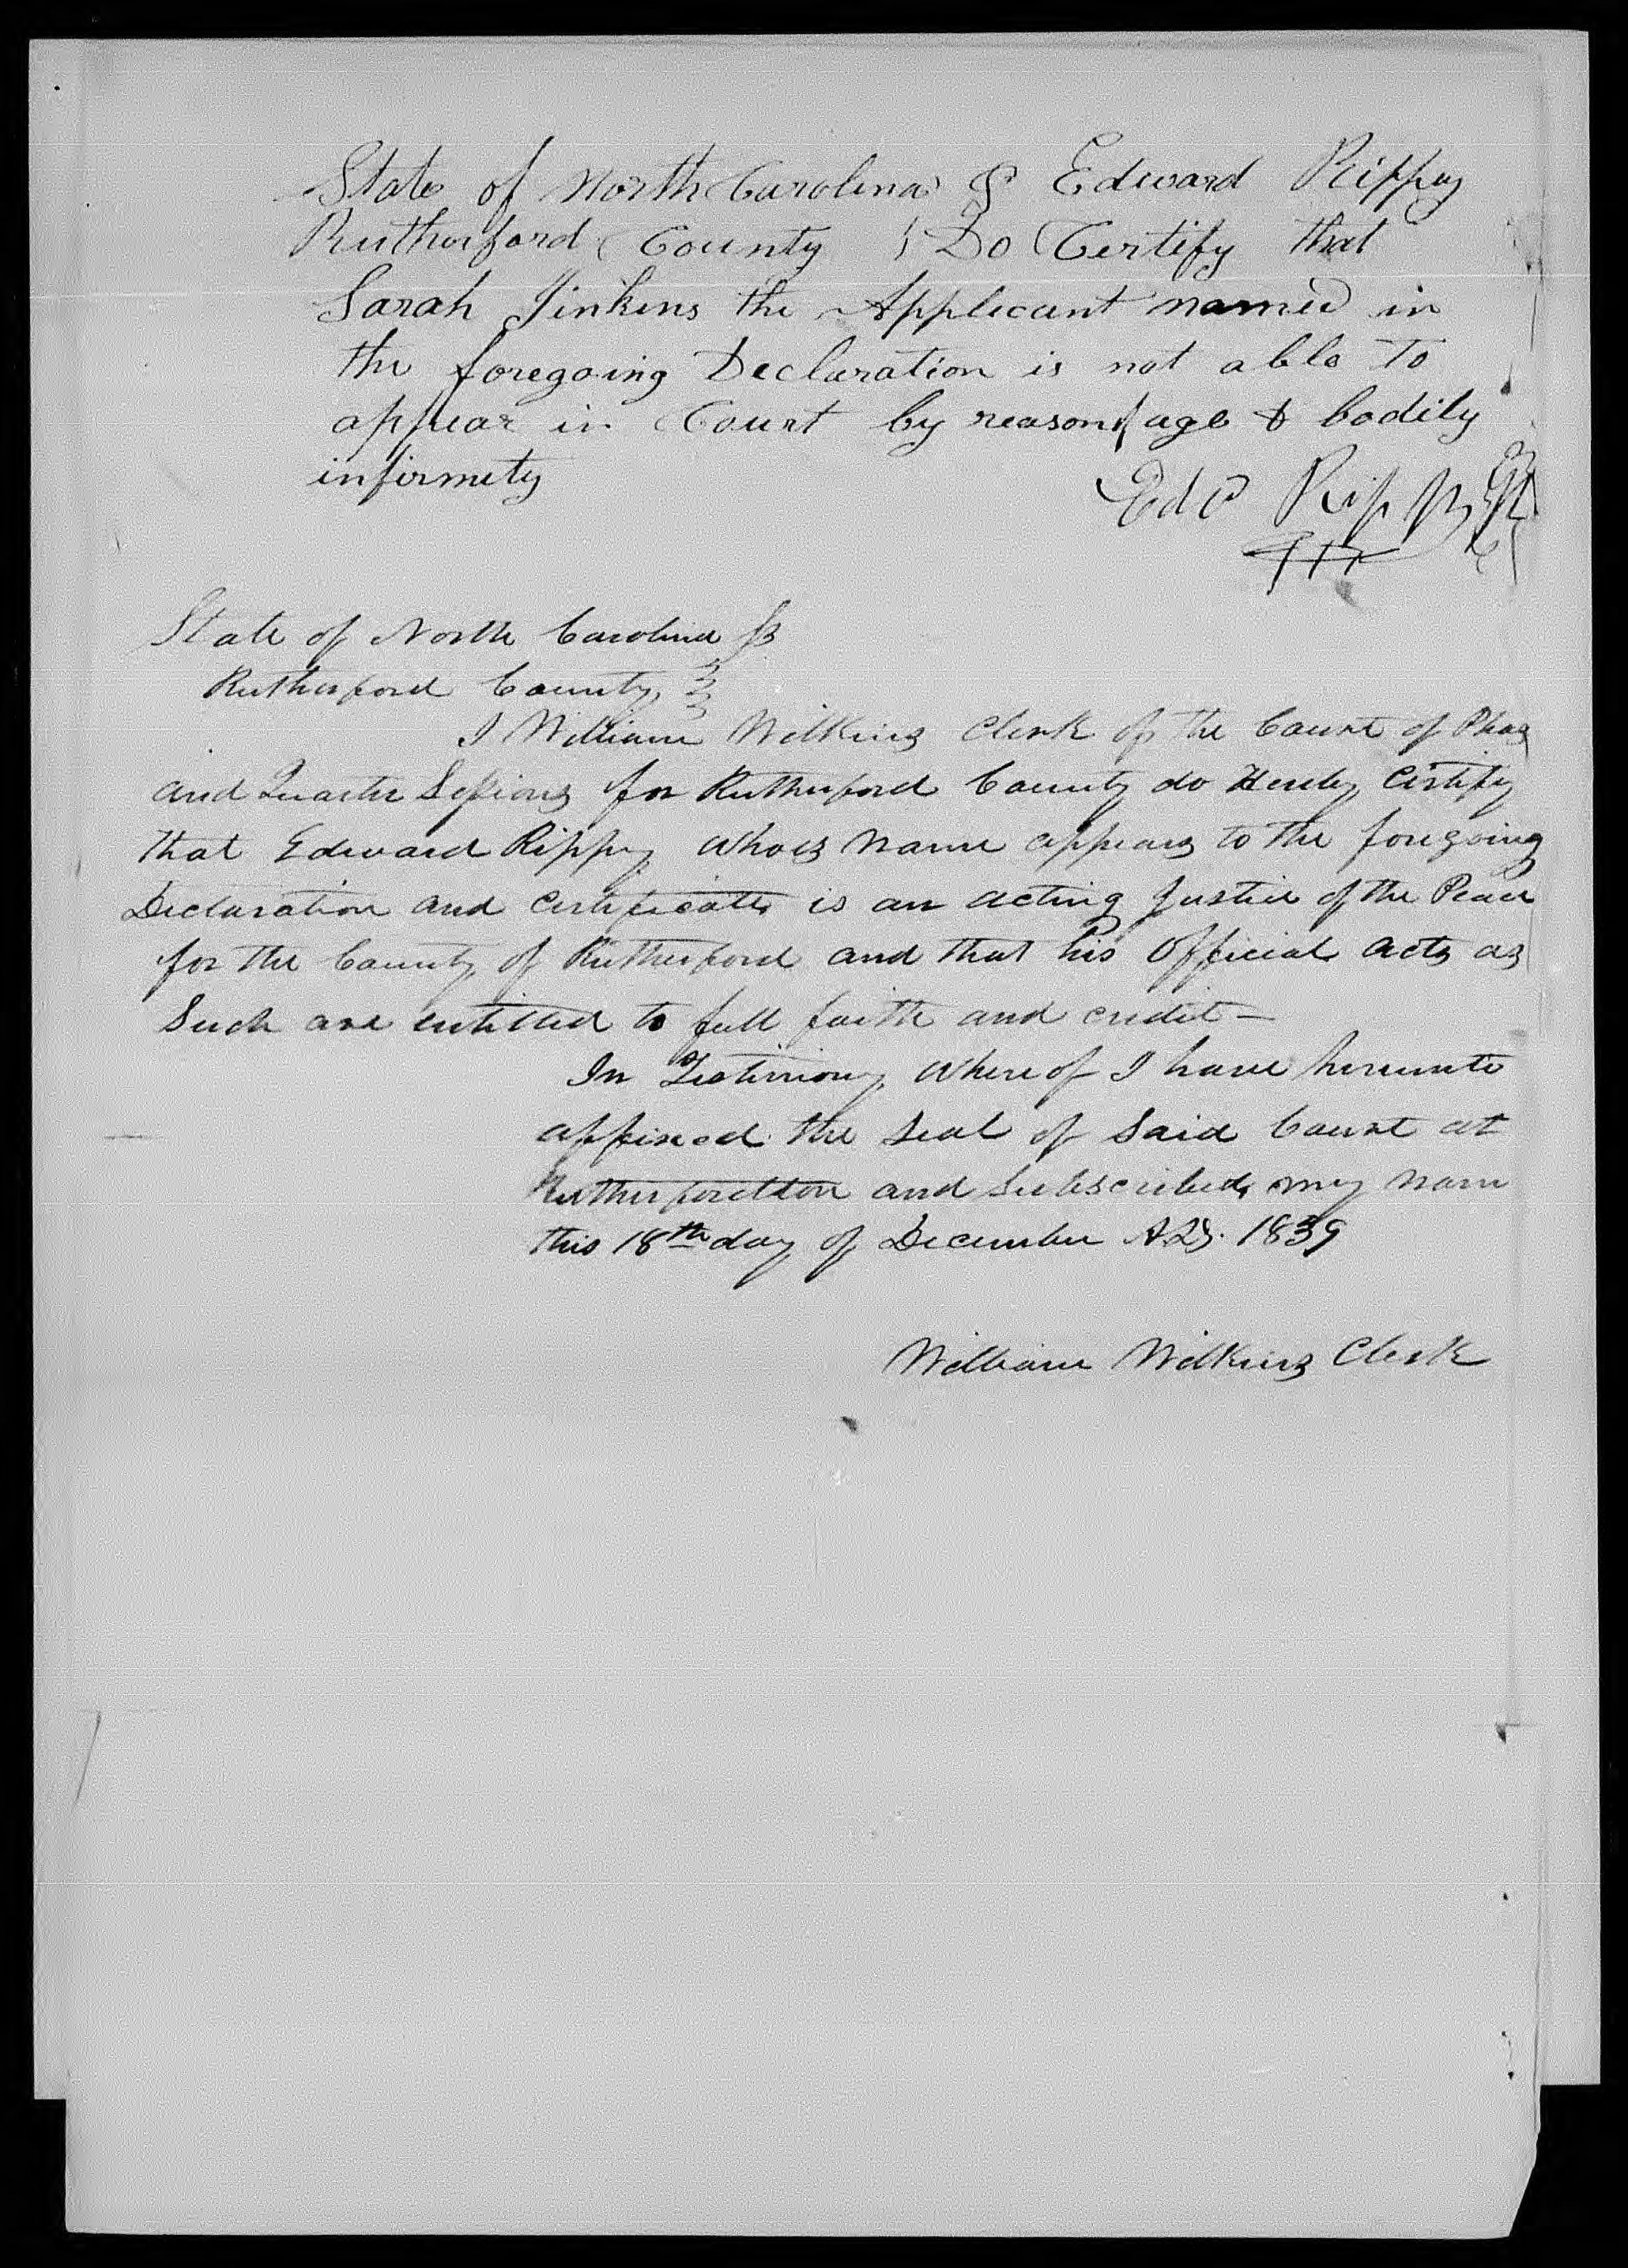 Application for a Widow's Pension from Sarah Jenkins, 16 November 1839, page 2